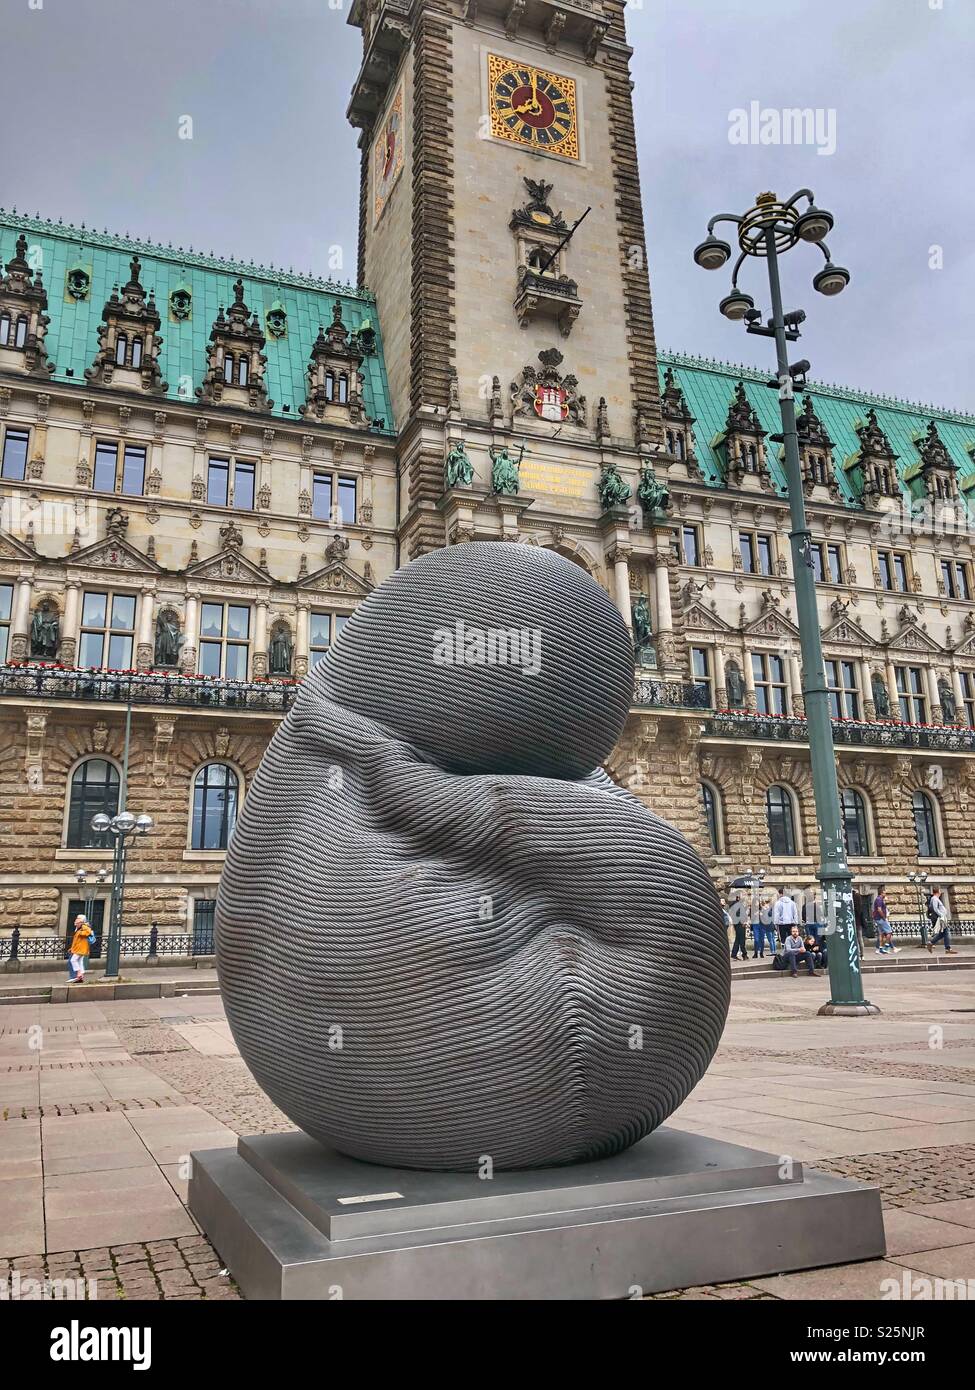 Embryo sculpture, Unlimited Life, created by Taiwanese artist Kang Mu-Xiang, stands in Hamburg’s Central Square, Rathausmarkt. Stock Photo